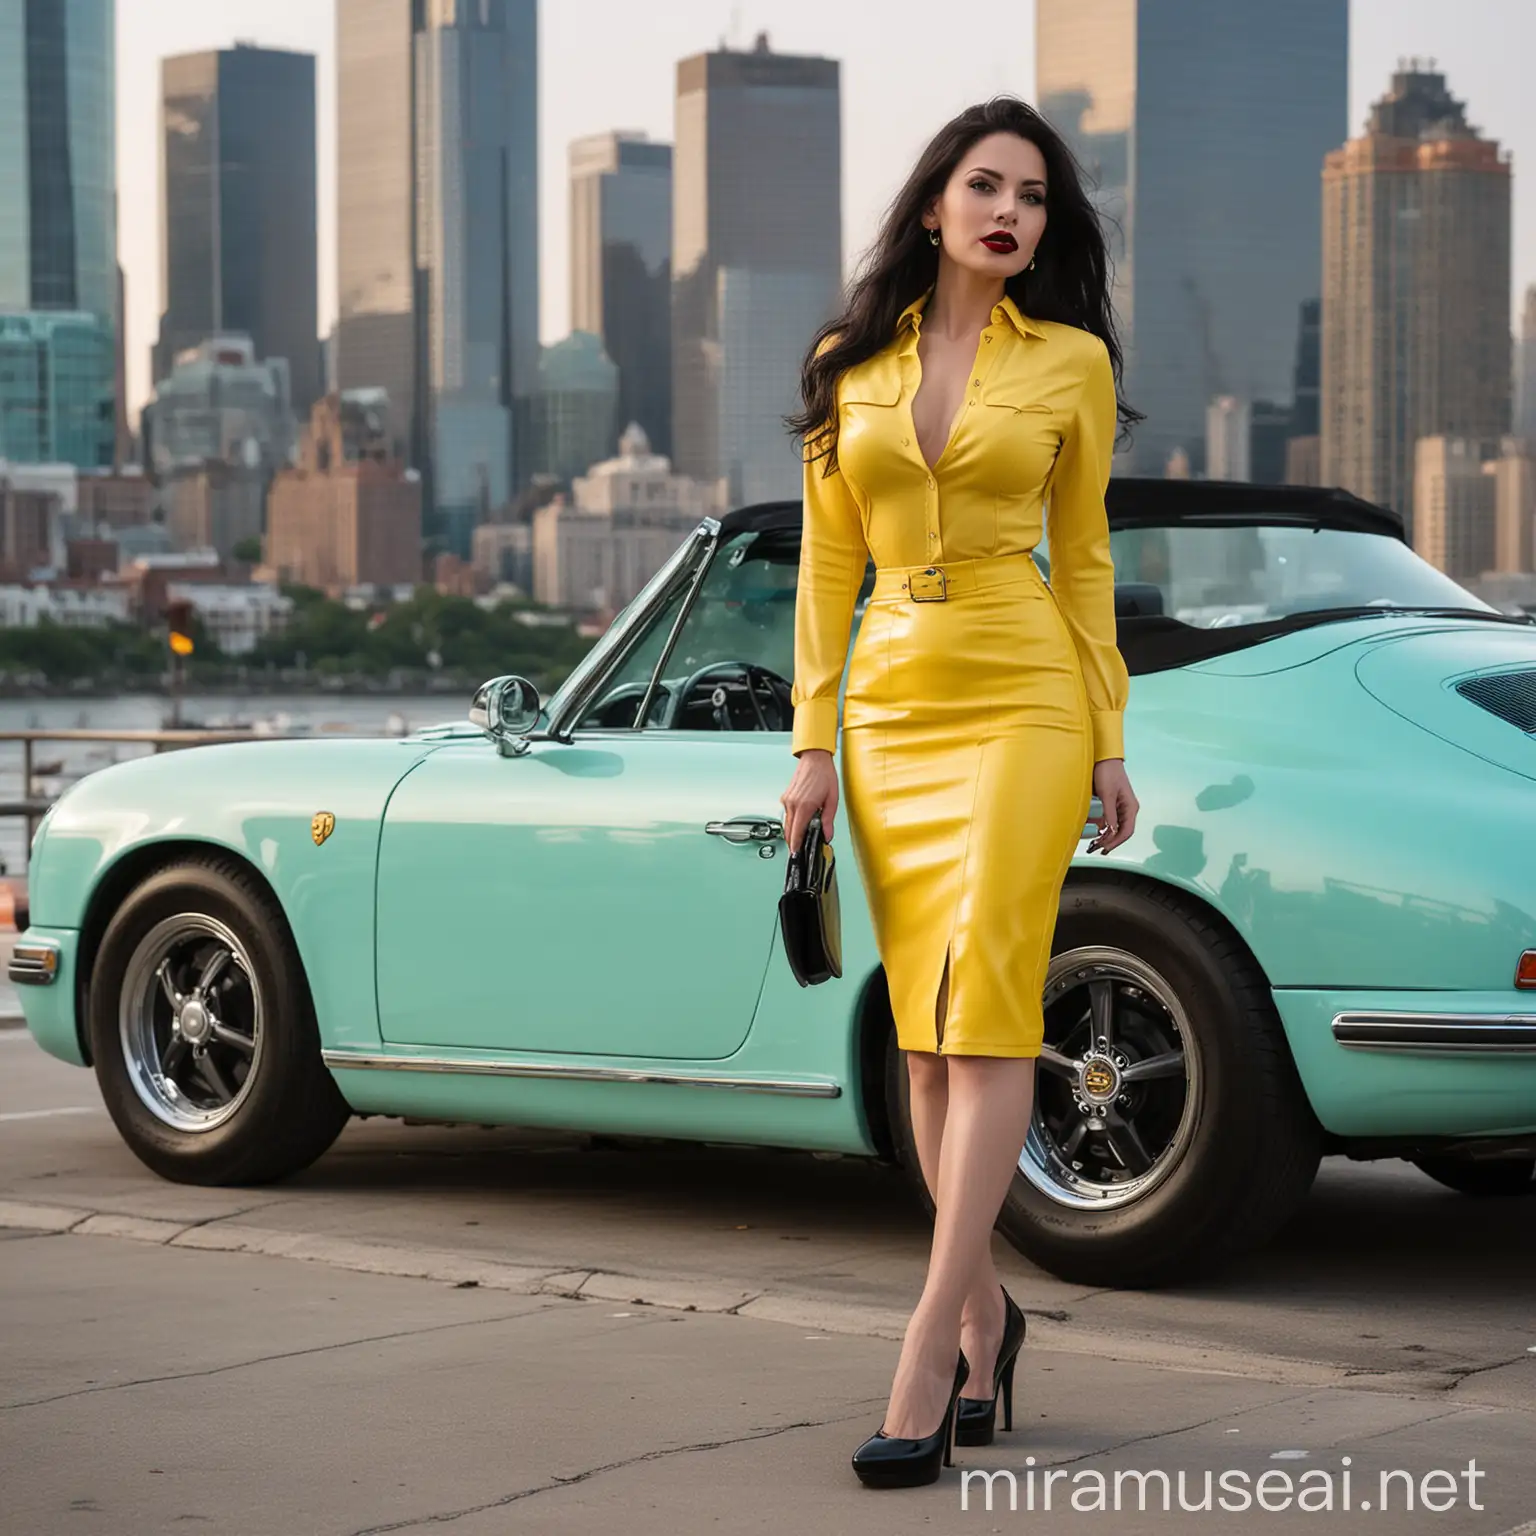 Fashionable Woman in Yellow Leather Skirt with Vintage Porsche in City Setting